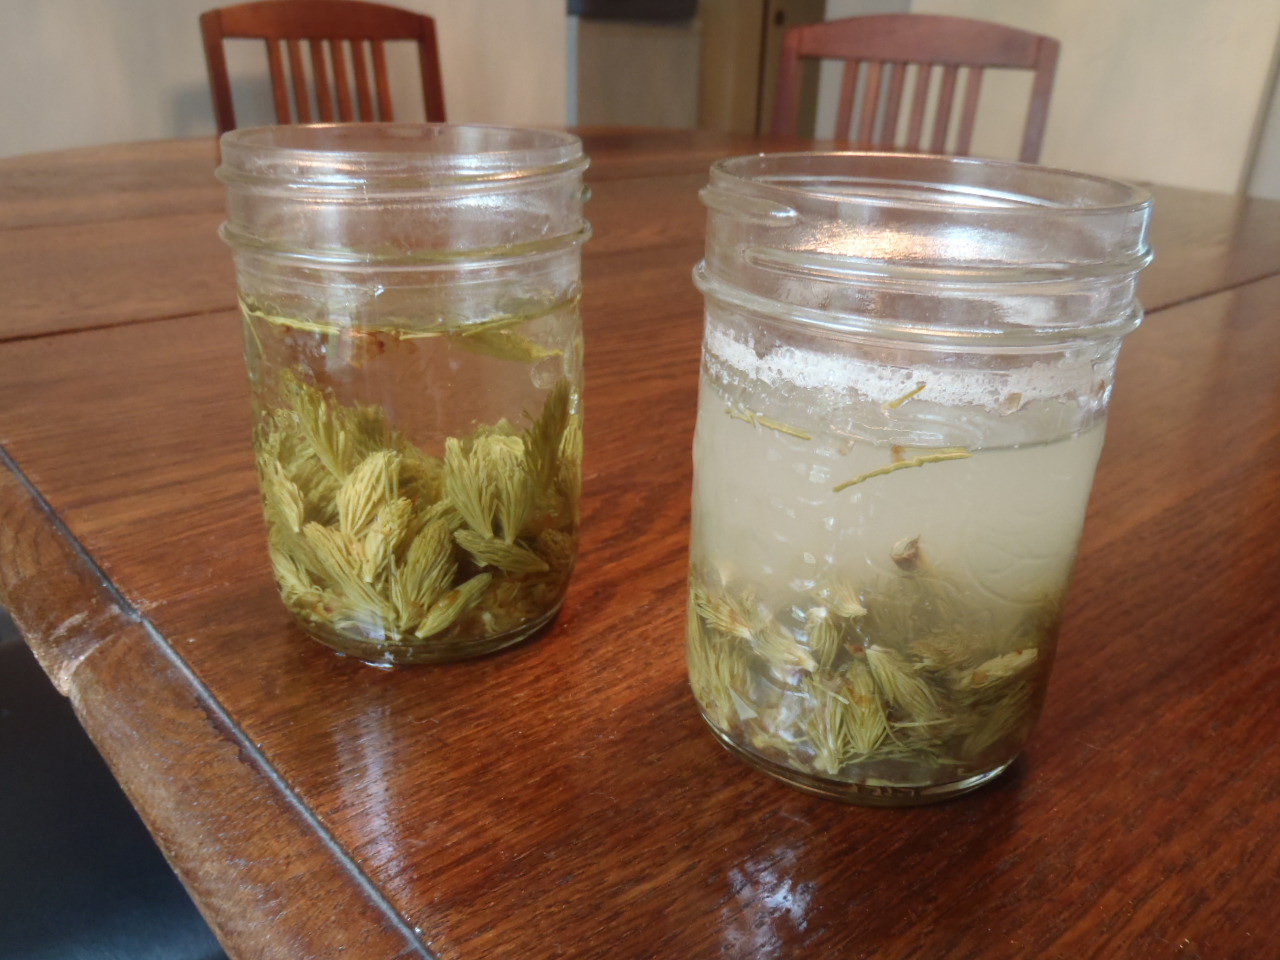 Two jars of spruce syrup: one briefly simmered, the other extensively boiled